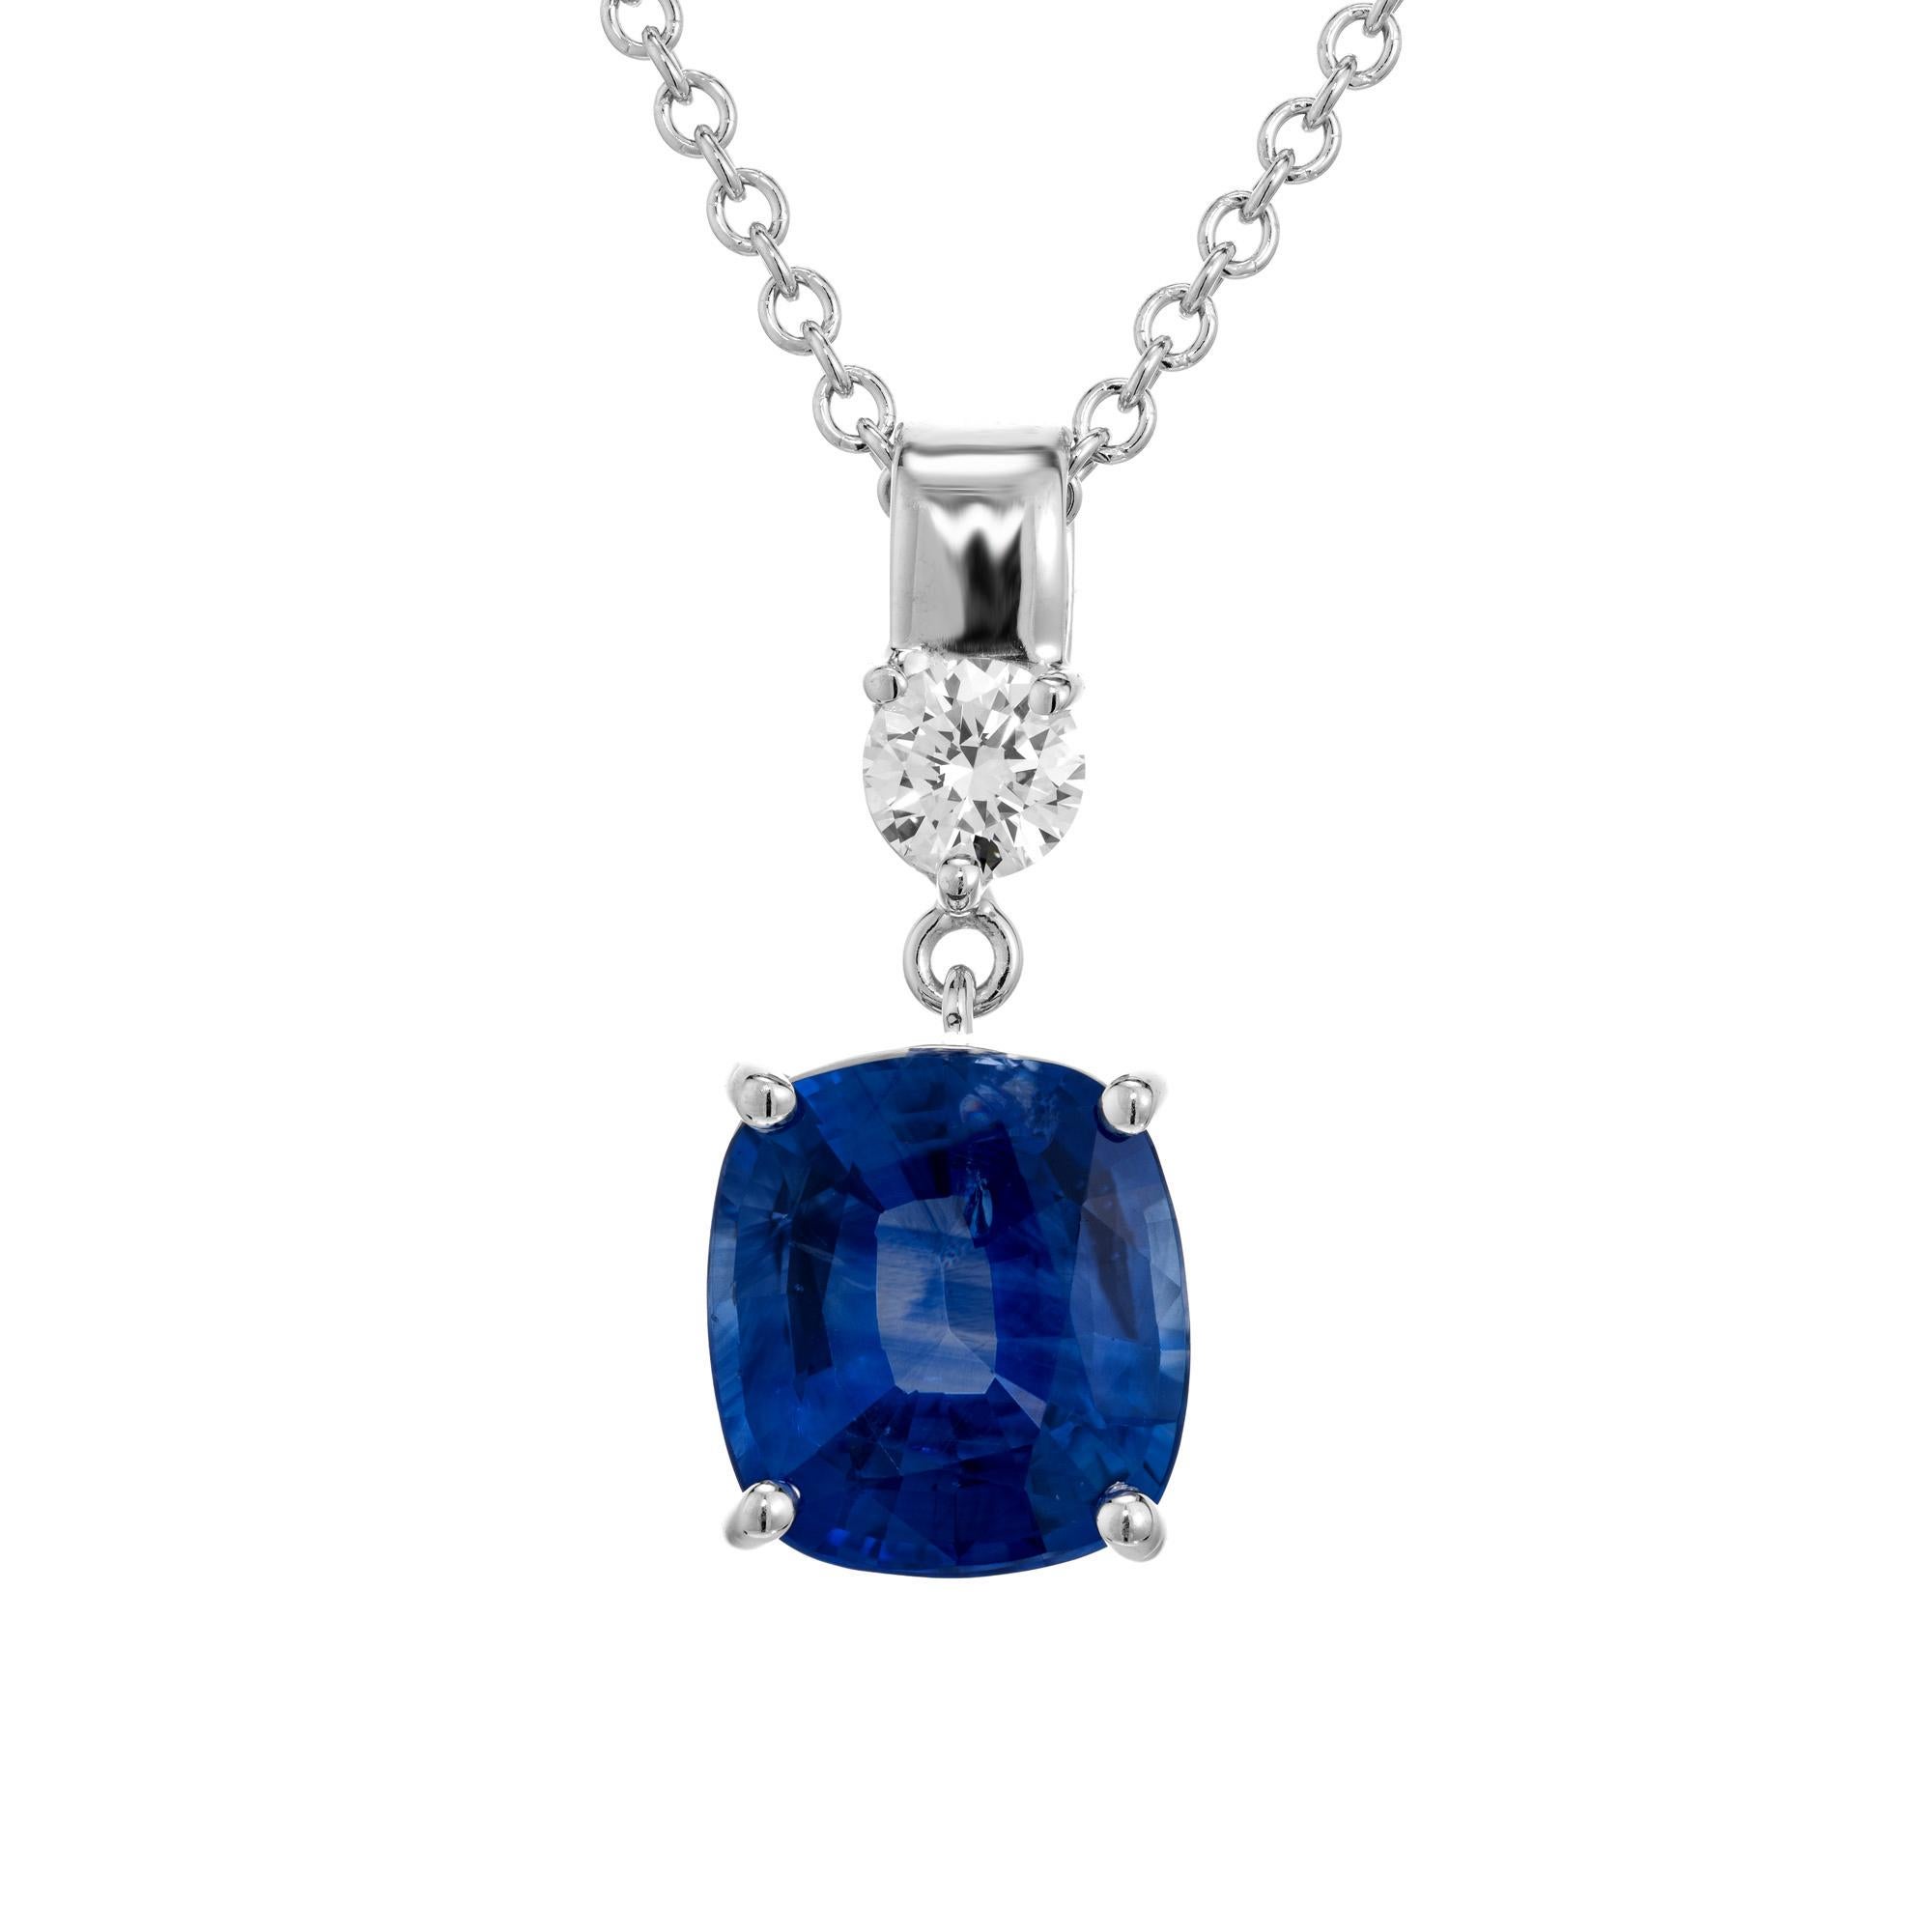 Sapphire and diamond pendant necklace. GIA certified cushion cut 1.95ct sapphire, set in a simple classic four prong 14k white gold setting with one round brilliant cut accent diamond. 16 inch 14k white gold link chain. GIA has certified this